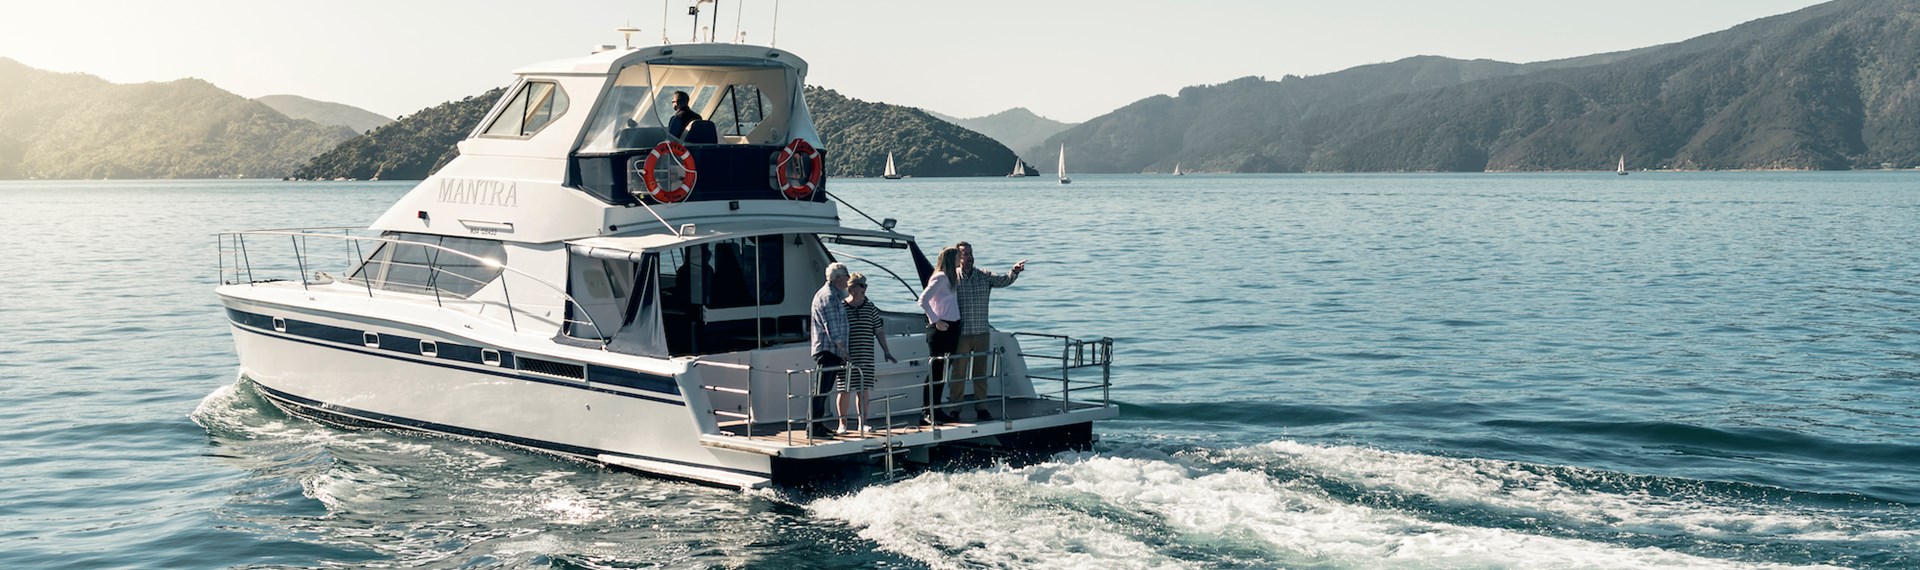 MV Mantra is ideal for small-medium group cruises and water-based transfers from Picton in New Zealand's Marlborough Sounds.